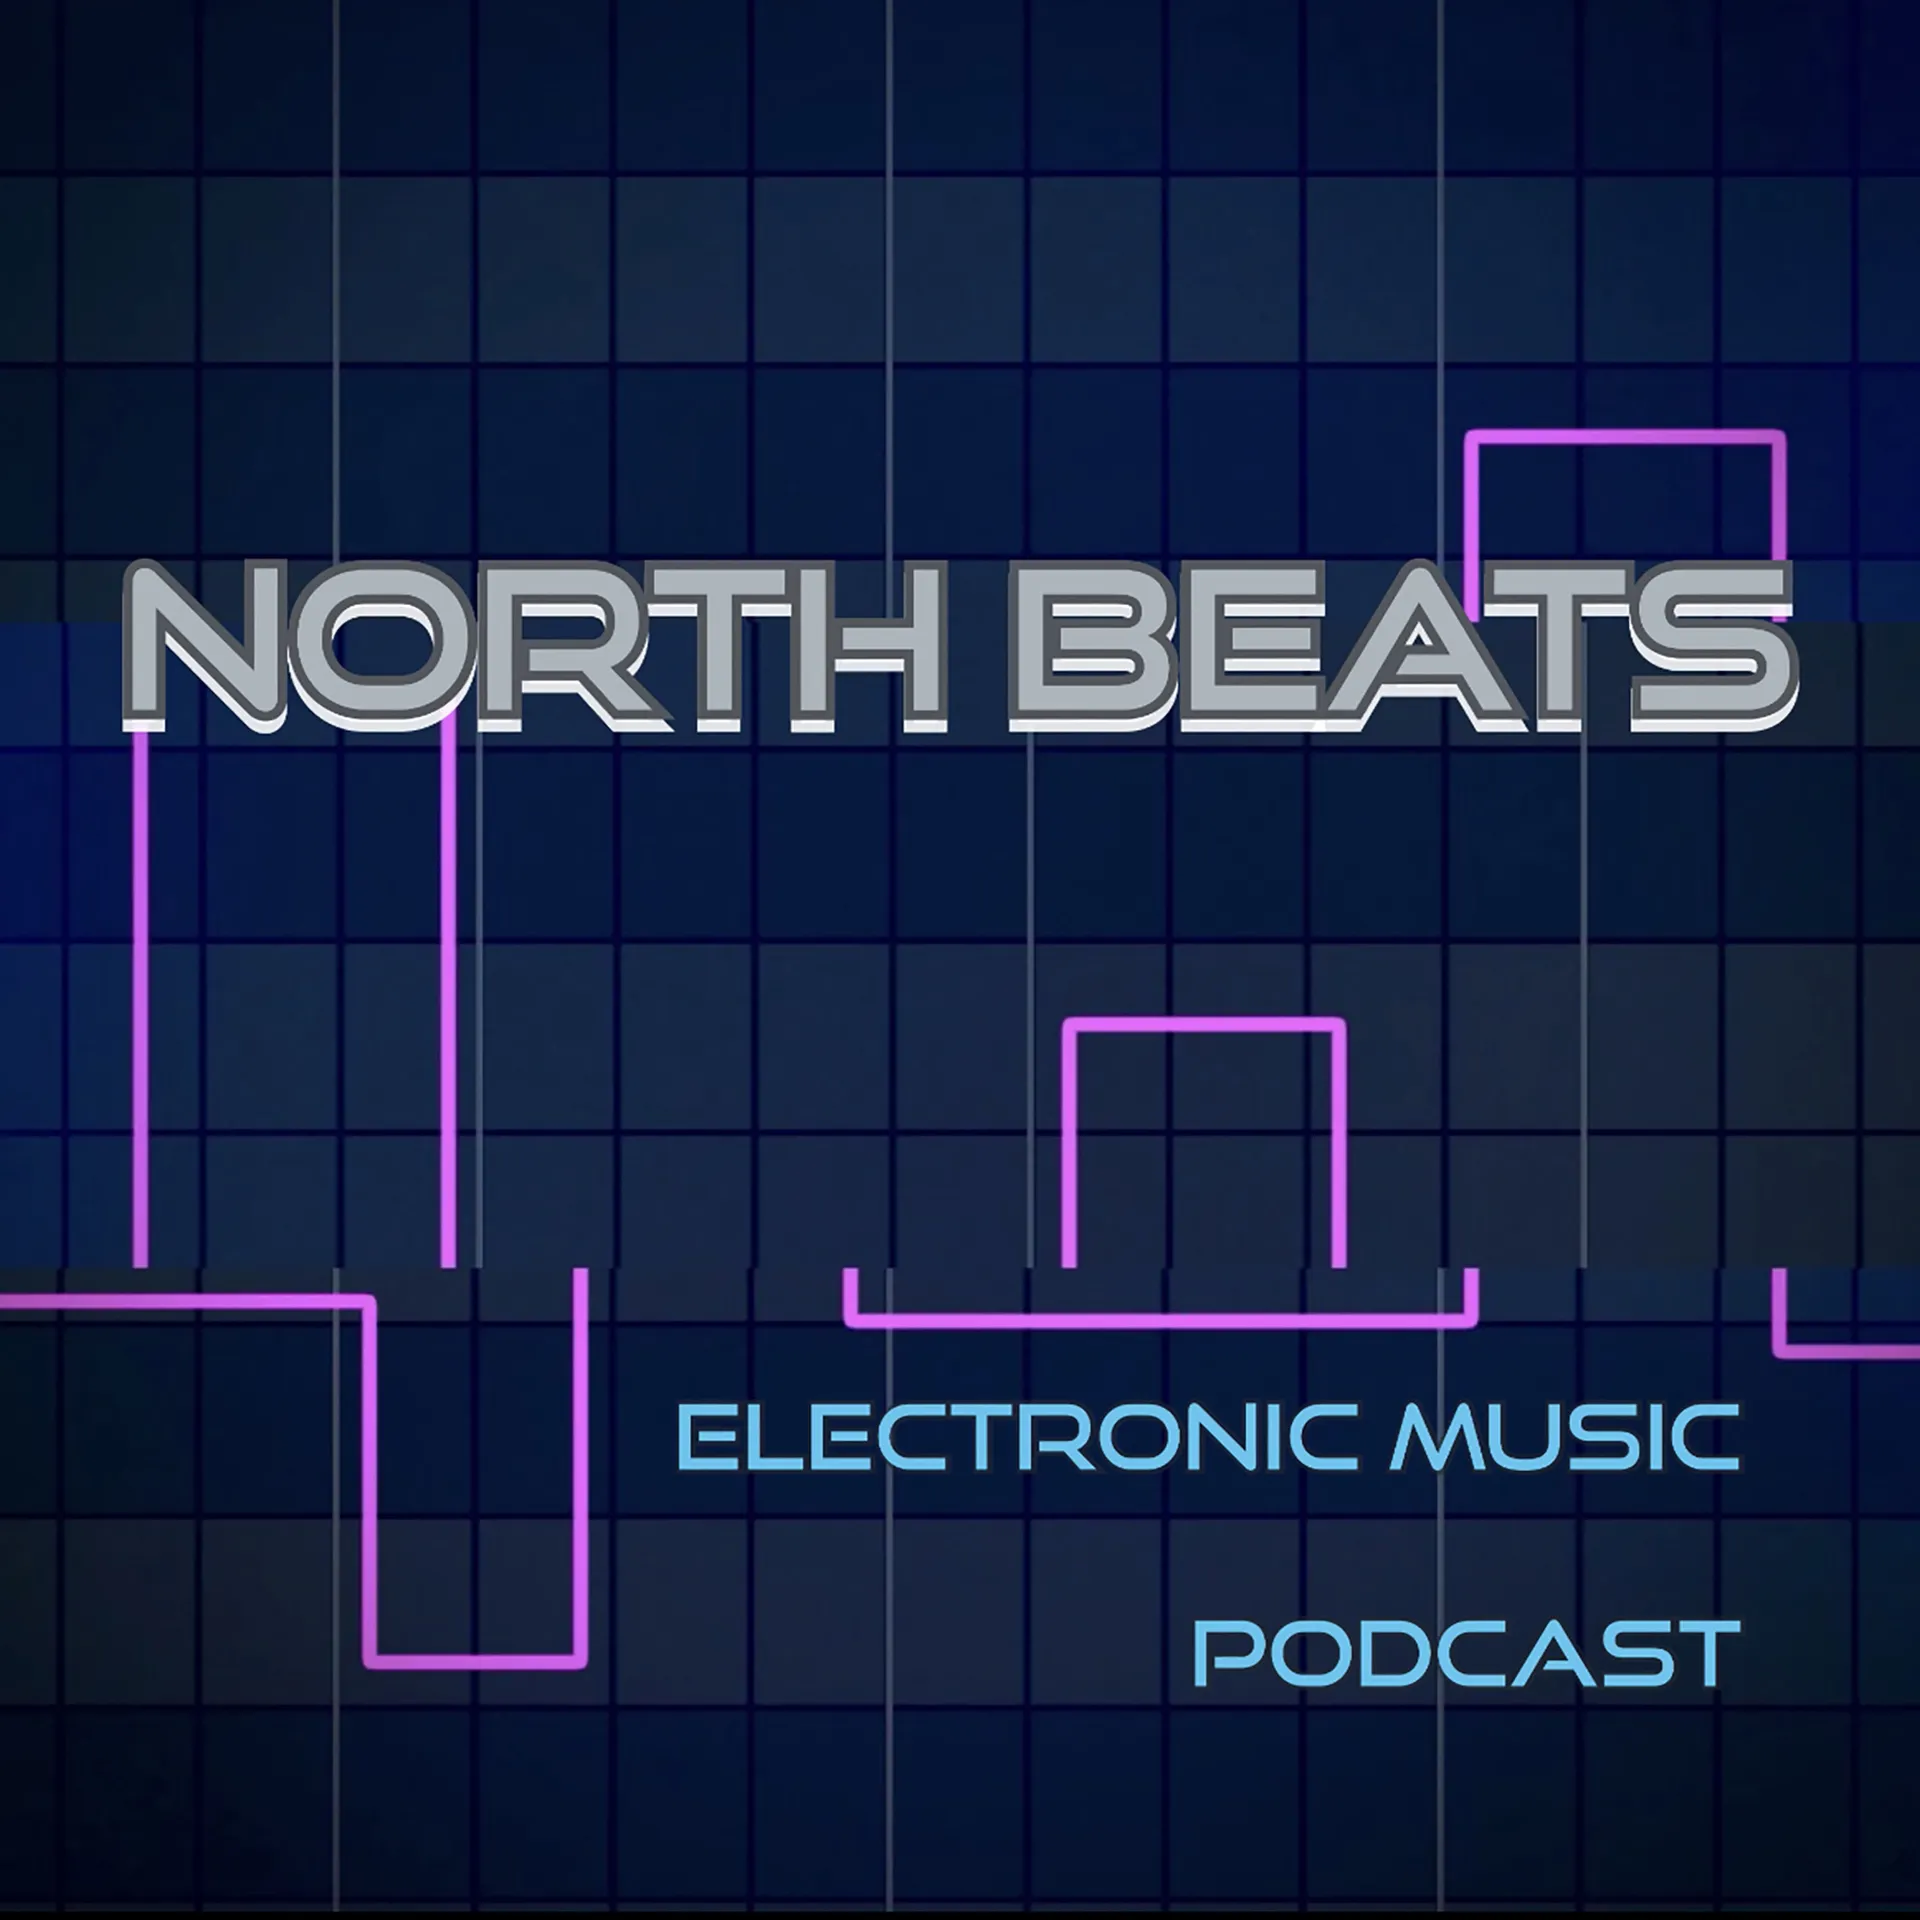 Johno Wells interview on North Beats podcast